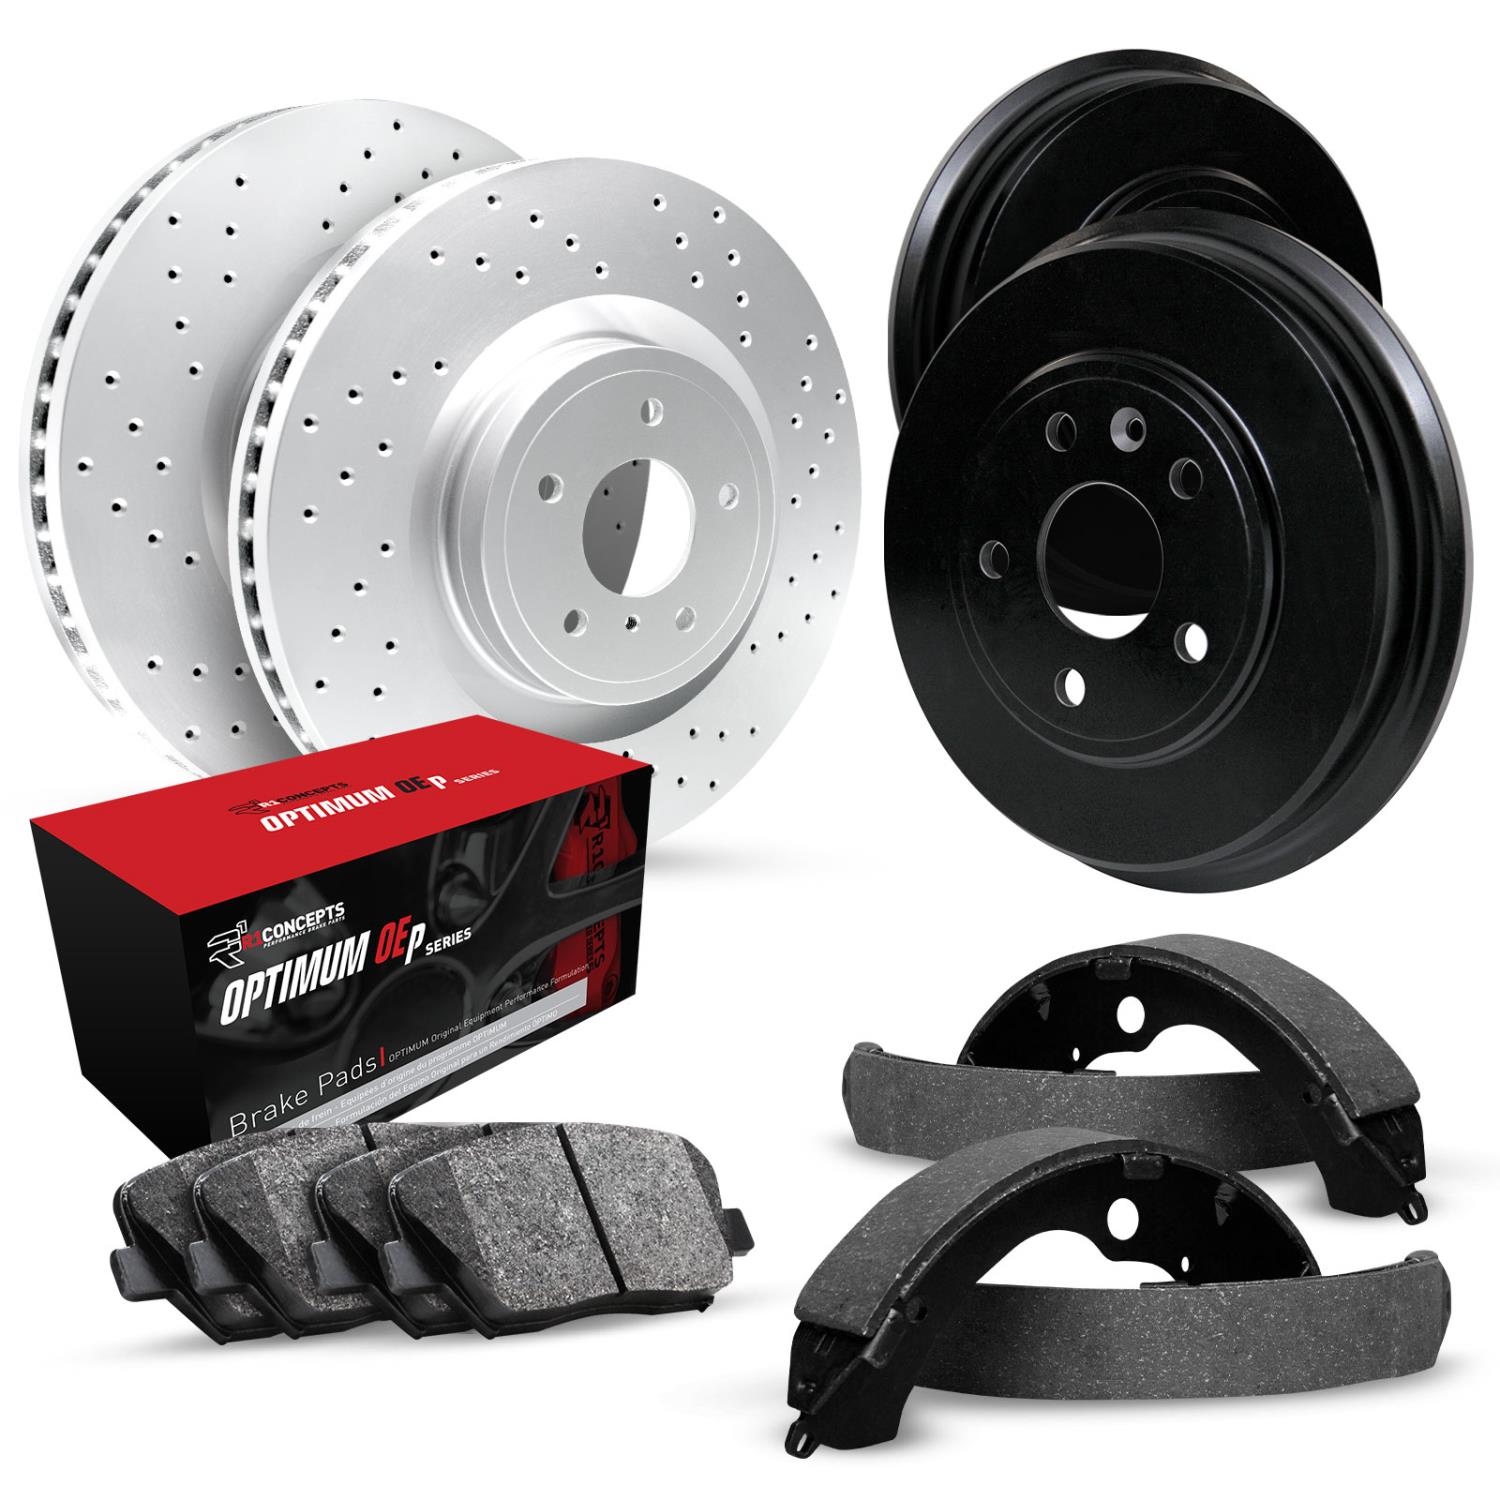 GEO-Carbon Drilled Brake Rotor & Drum Set w/Optimum OE Pads & Shoes, 2000-2004 Infiniti/Nissan, Position: Front & Rear